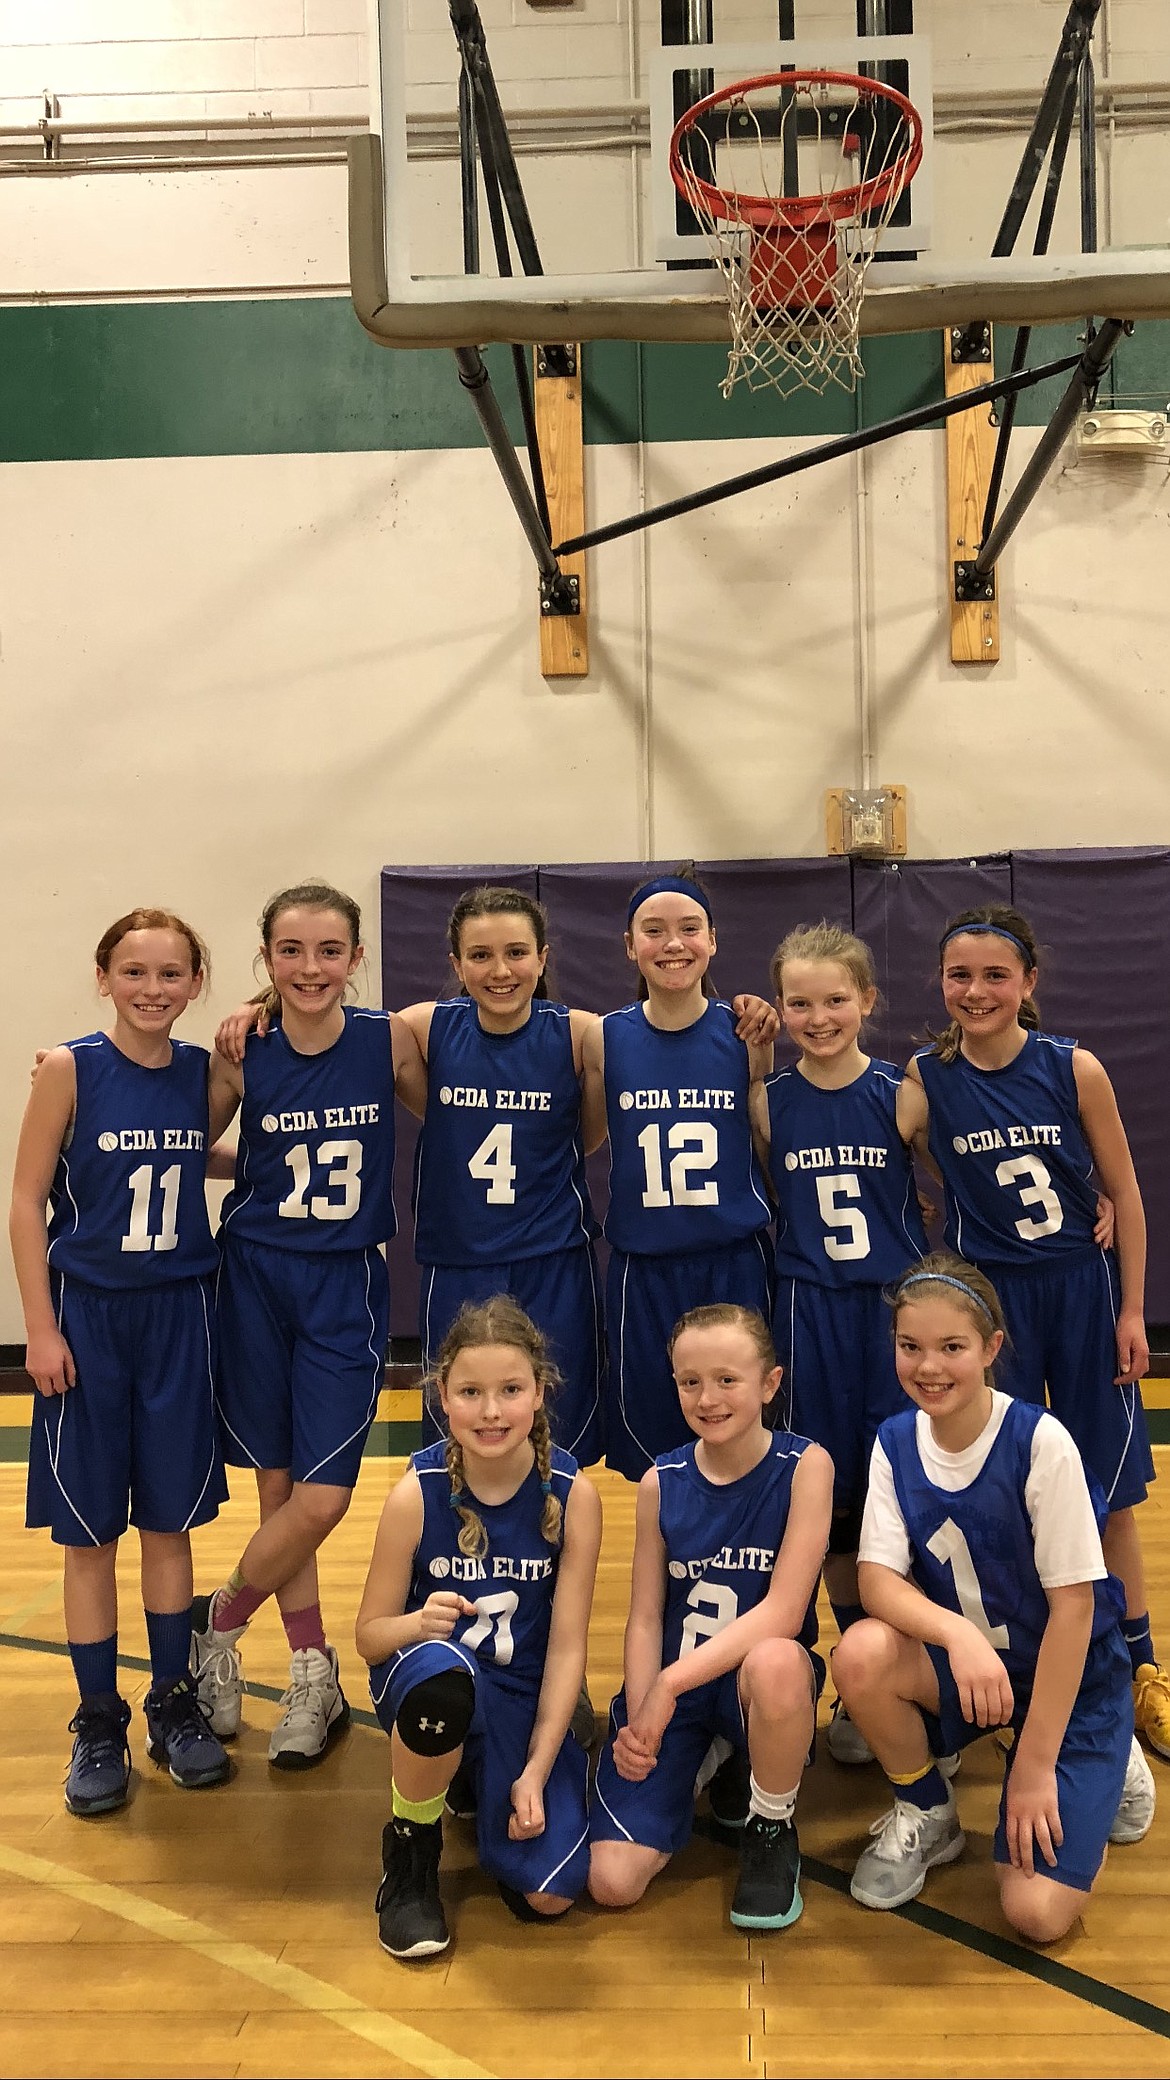 Courtesy photo
The Coeur d&#146;Alene Elite fifth-grade girls basketball team went 4-0 and won the AAU Bring in the Spring tournament March 10-11 at The Warehouse in Spokane. In the front row from left are Kyler Kirking, Mady Riley and Rachel Corette; and back row from left, Adi Murphree, Amalie Larson, Aniston Ewing, Sadie Zimmerman, Gracie Legg and Payton Gray.